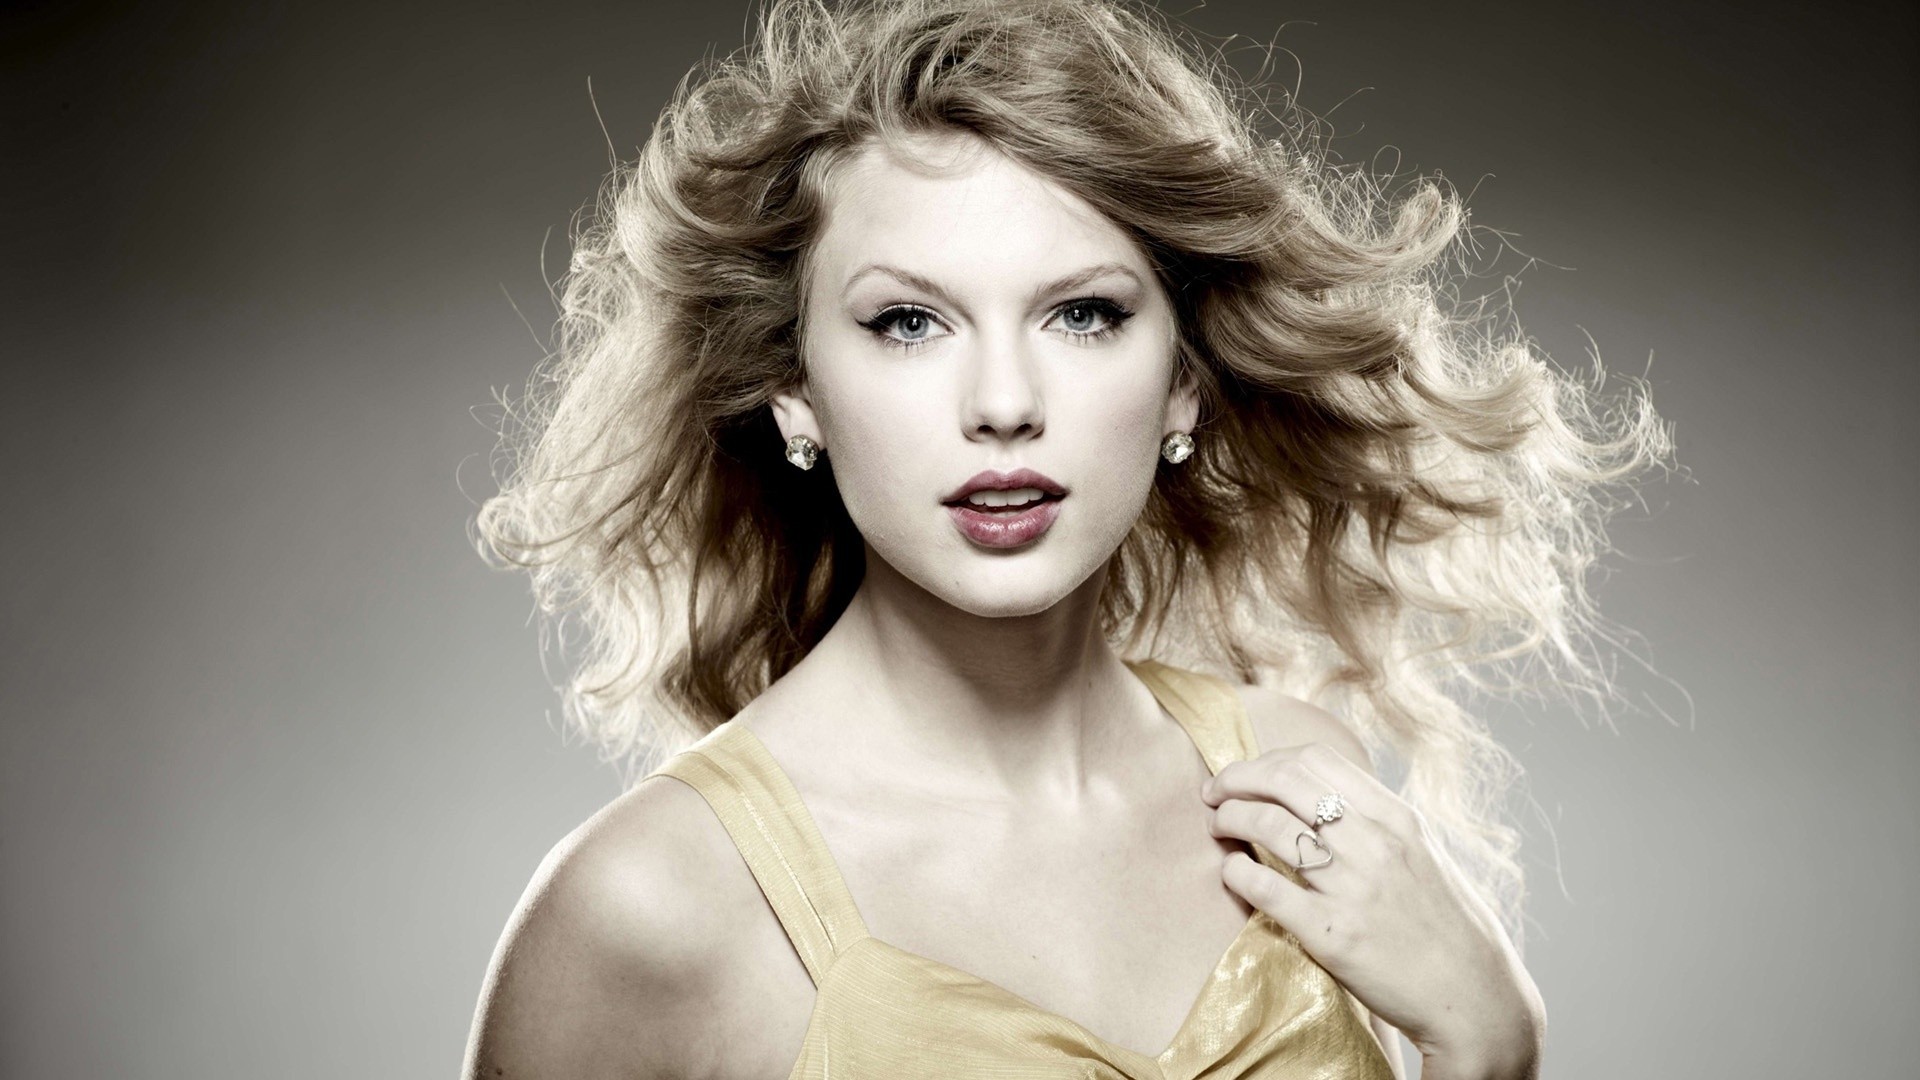 70+ Taylor Swift HD Wallpapers - Download at WallpaperBro | Taylor swift  hair, Hair styles, Taylor swift style